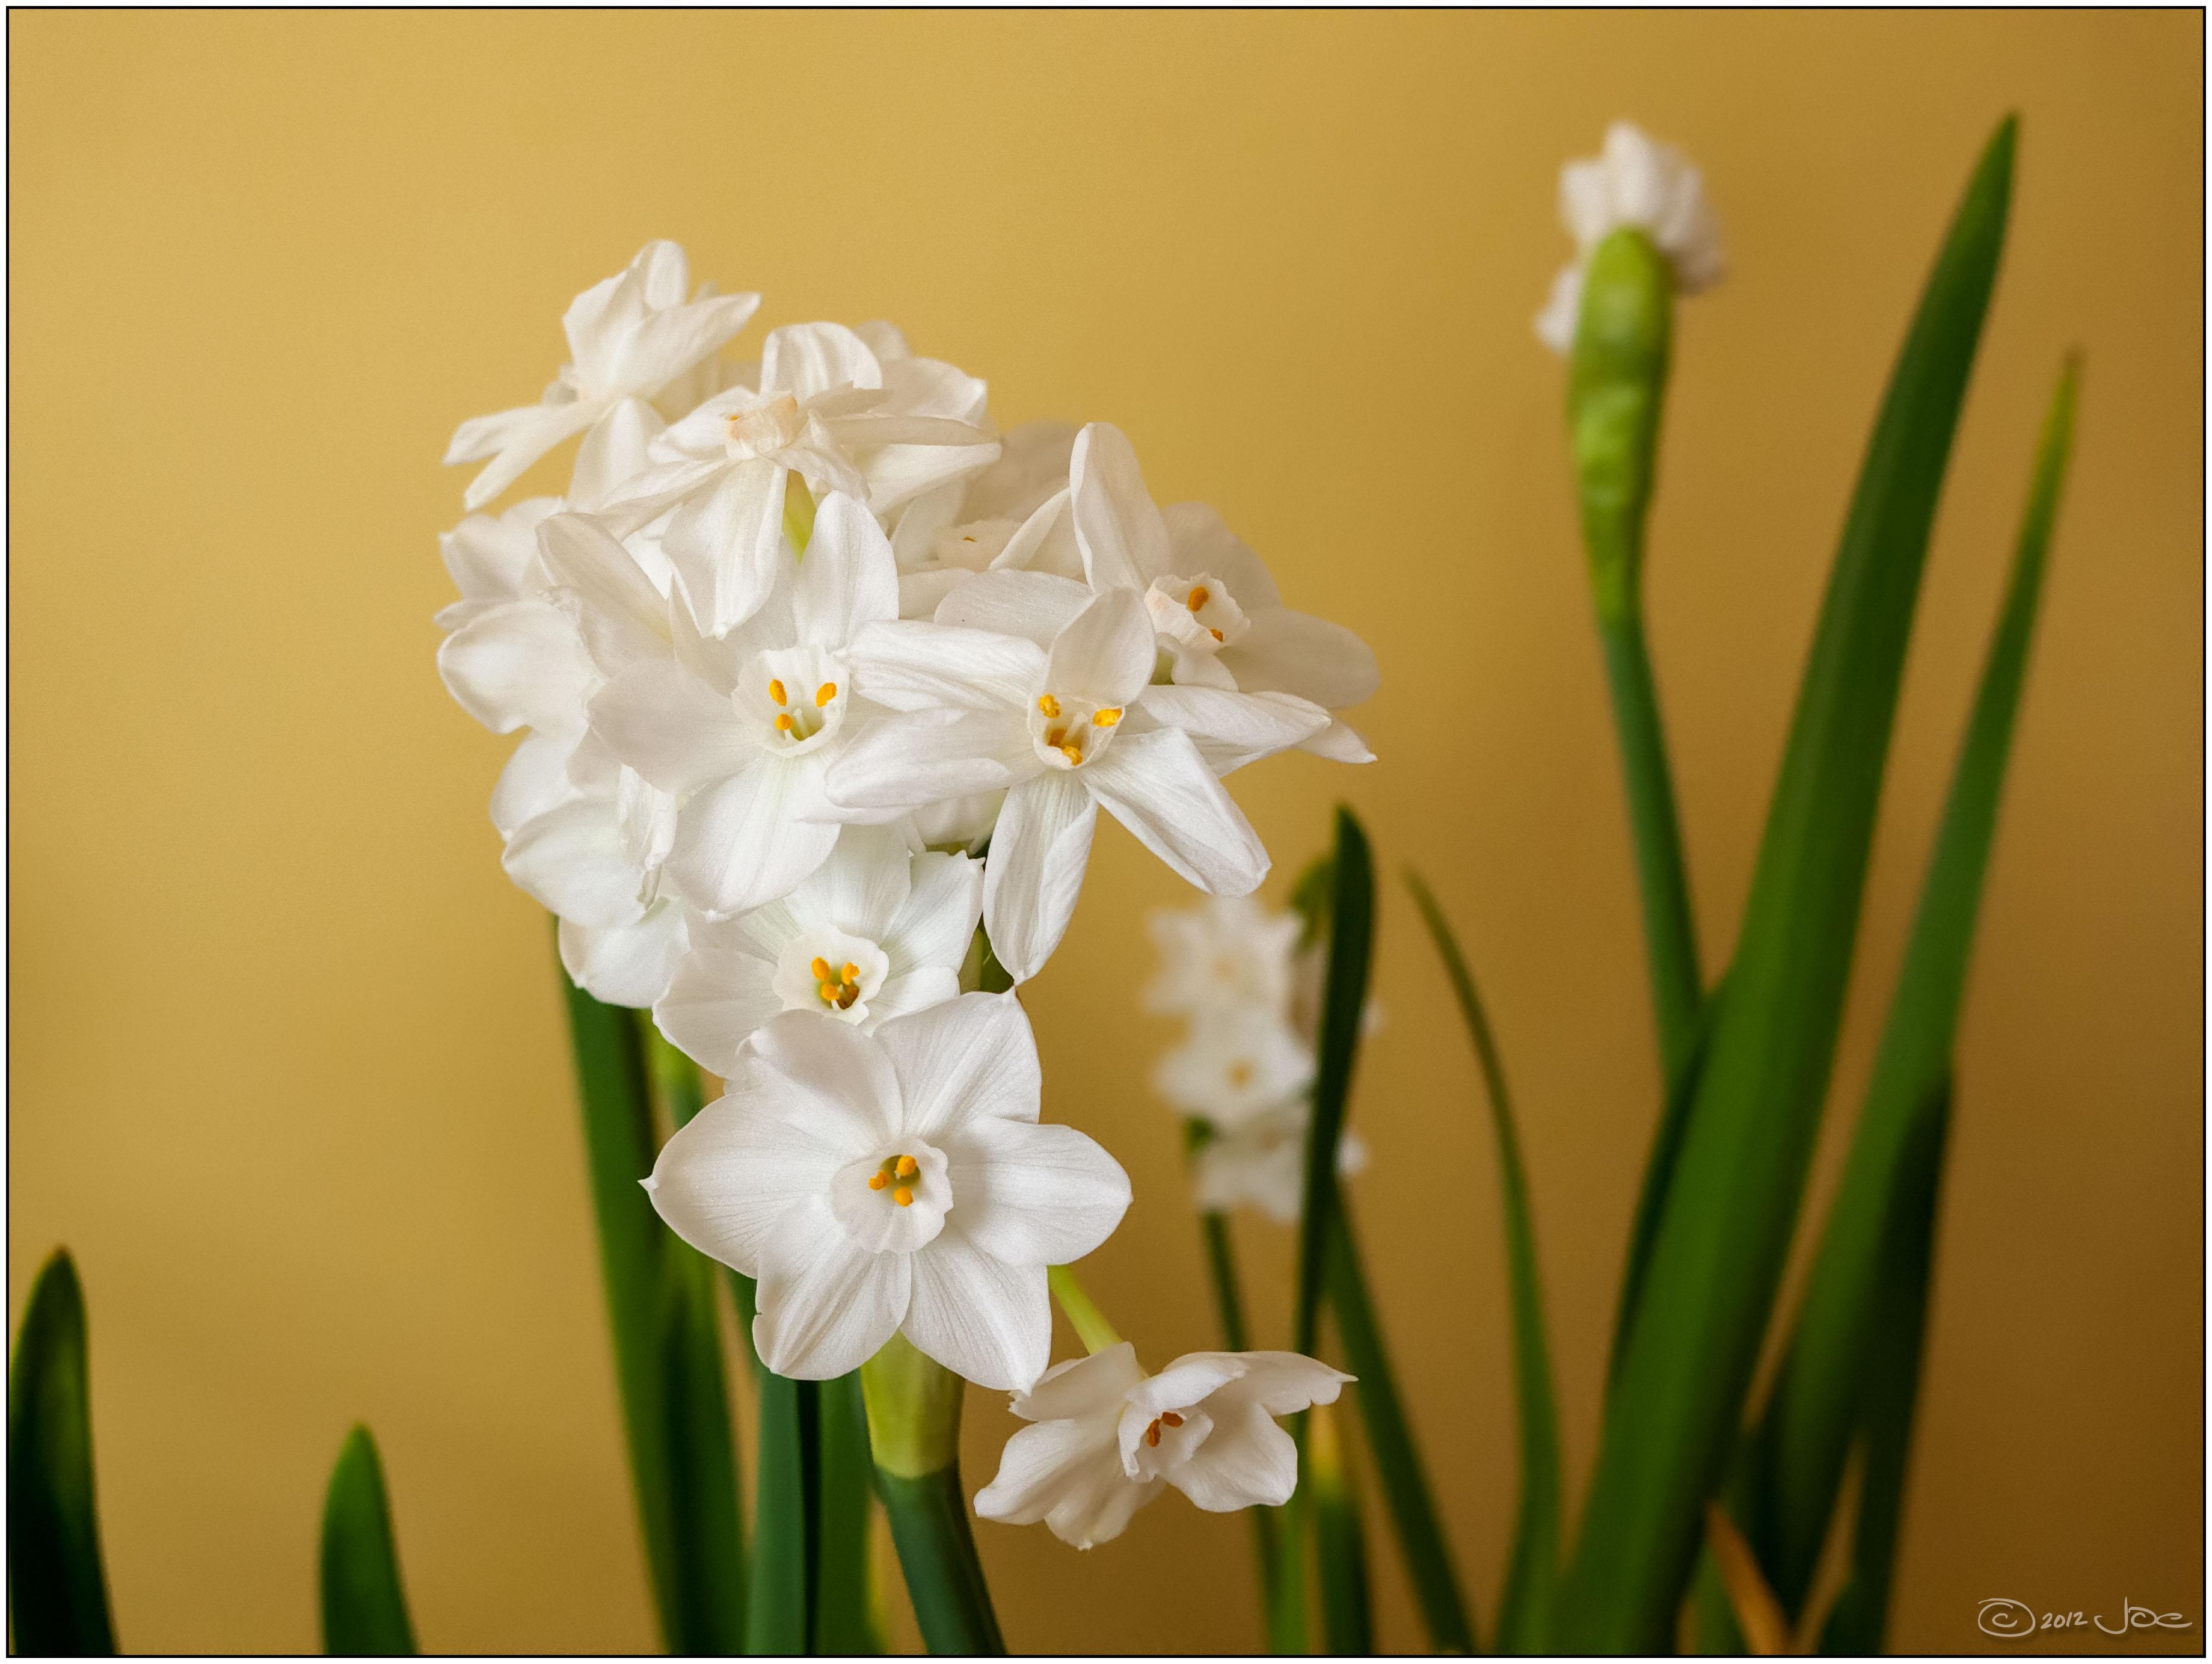 Narcissi 'Galilee' - Paperwhites from Leo Berbee Bulb Company